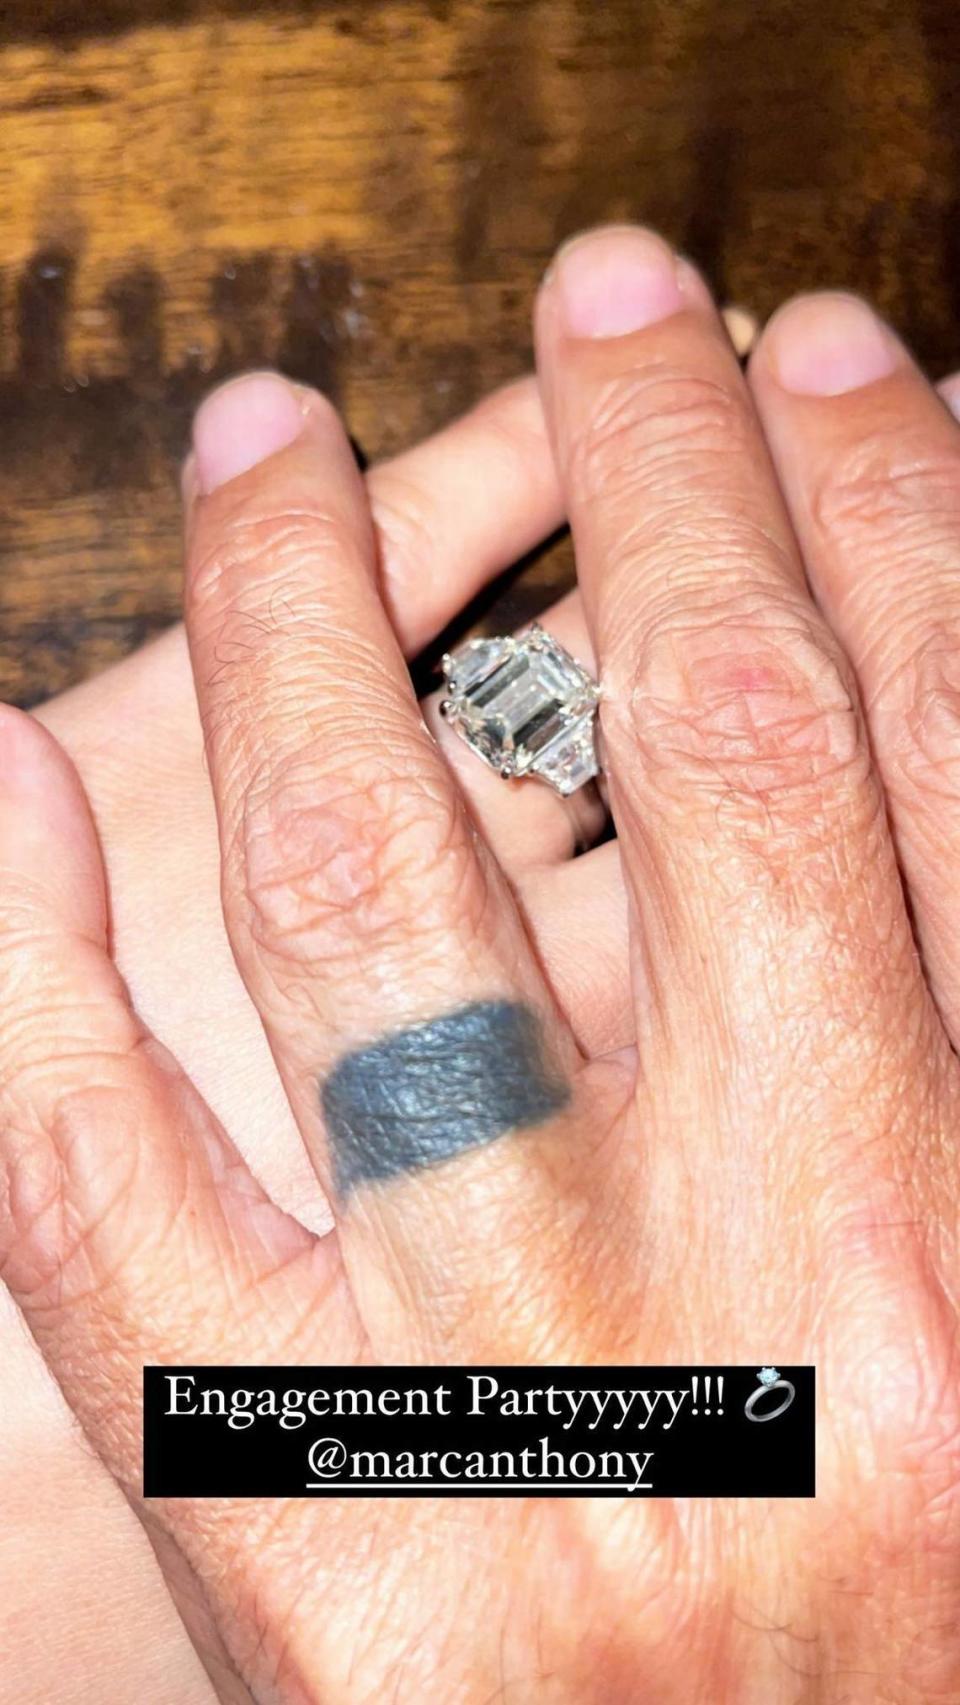 Nadia’s Ring. The model unveiled her stunning jewelry in her engagement announcement via her Instagram Stories in May 2022. The massive ring included a large rock in the center with smaller diamonds on the band.